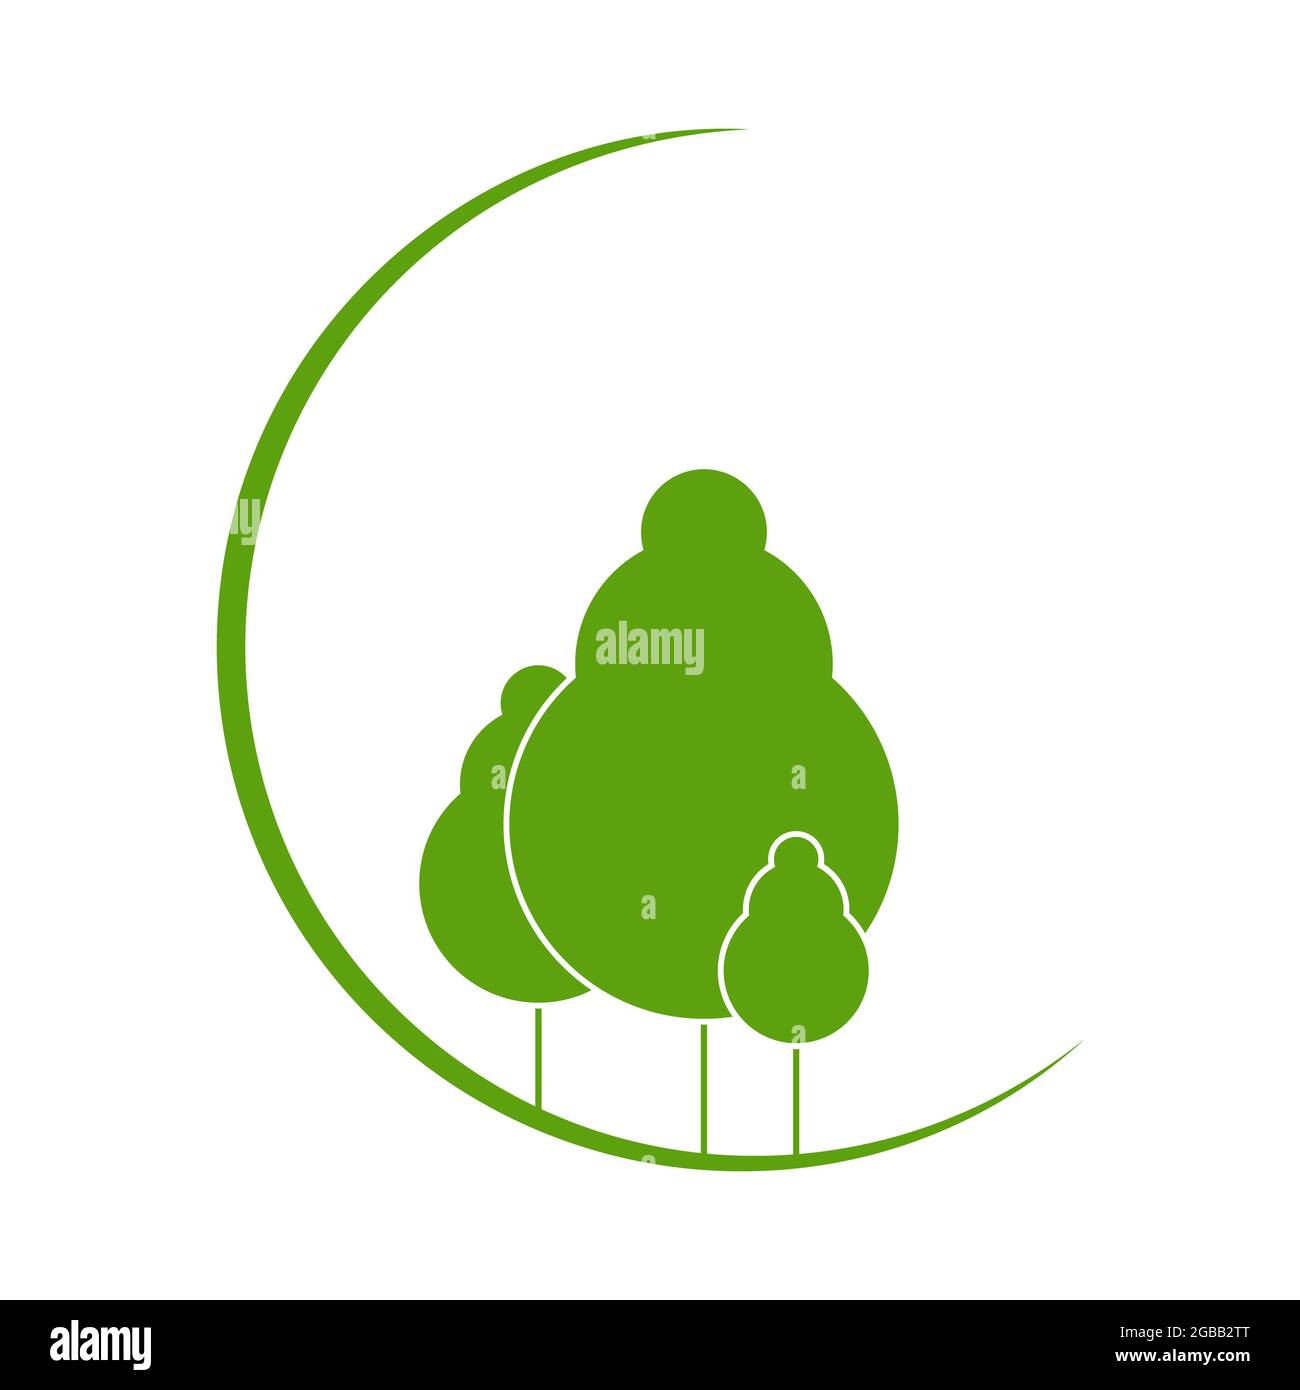 Logo for forestry or eco company or event: green trees on the background of a crescent moon. Raster creative illustration Stock Photo